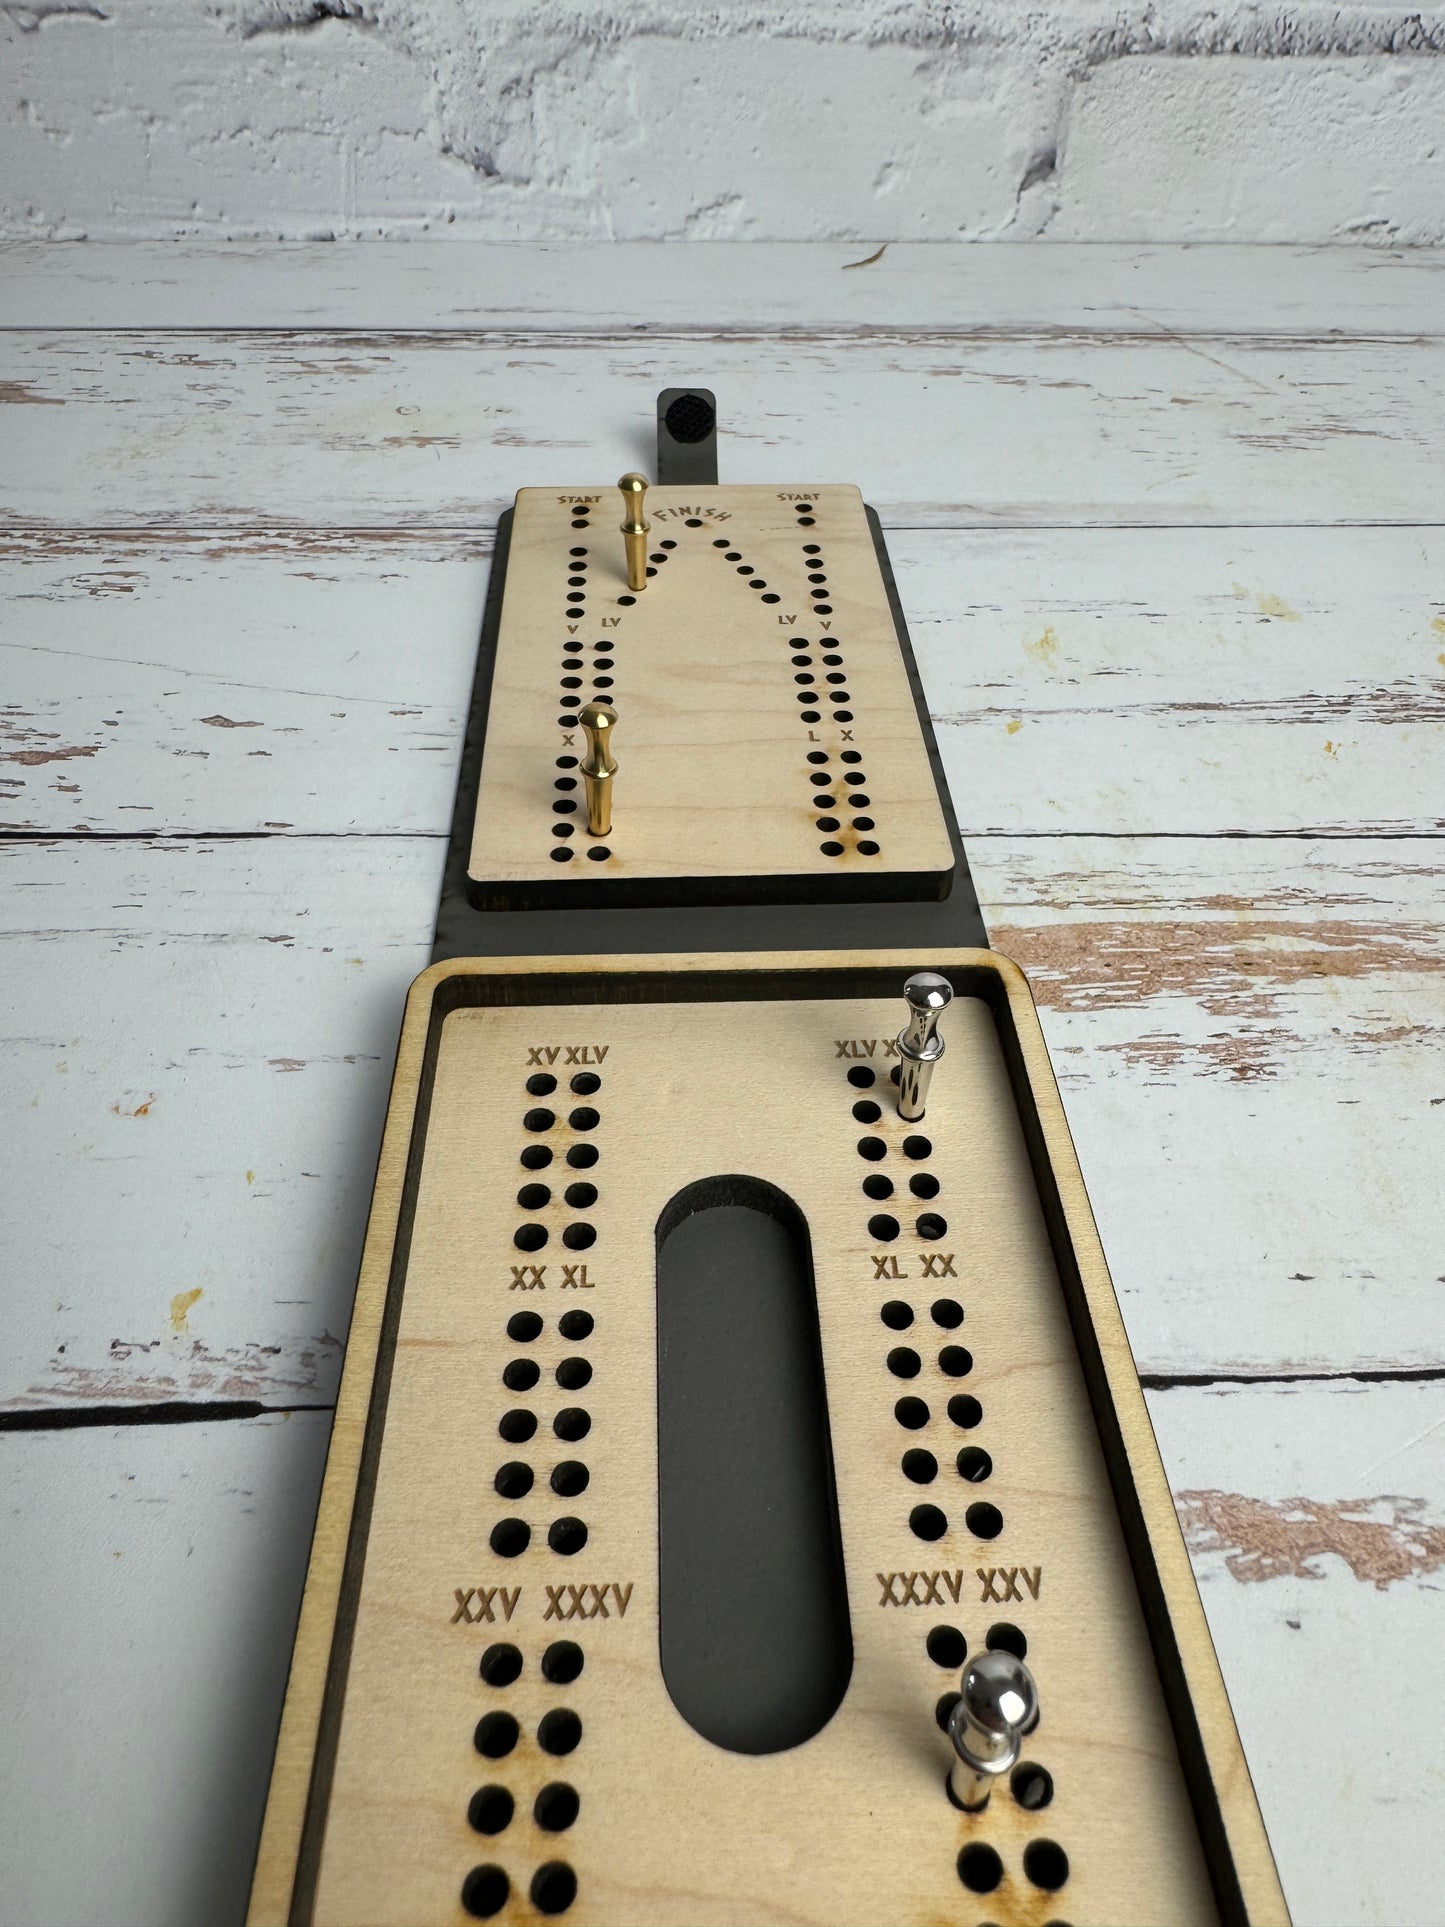 Folding Cribbage Board - Love to Fly